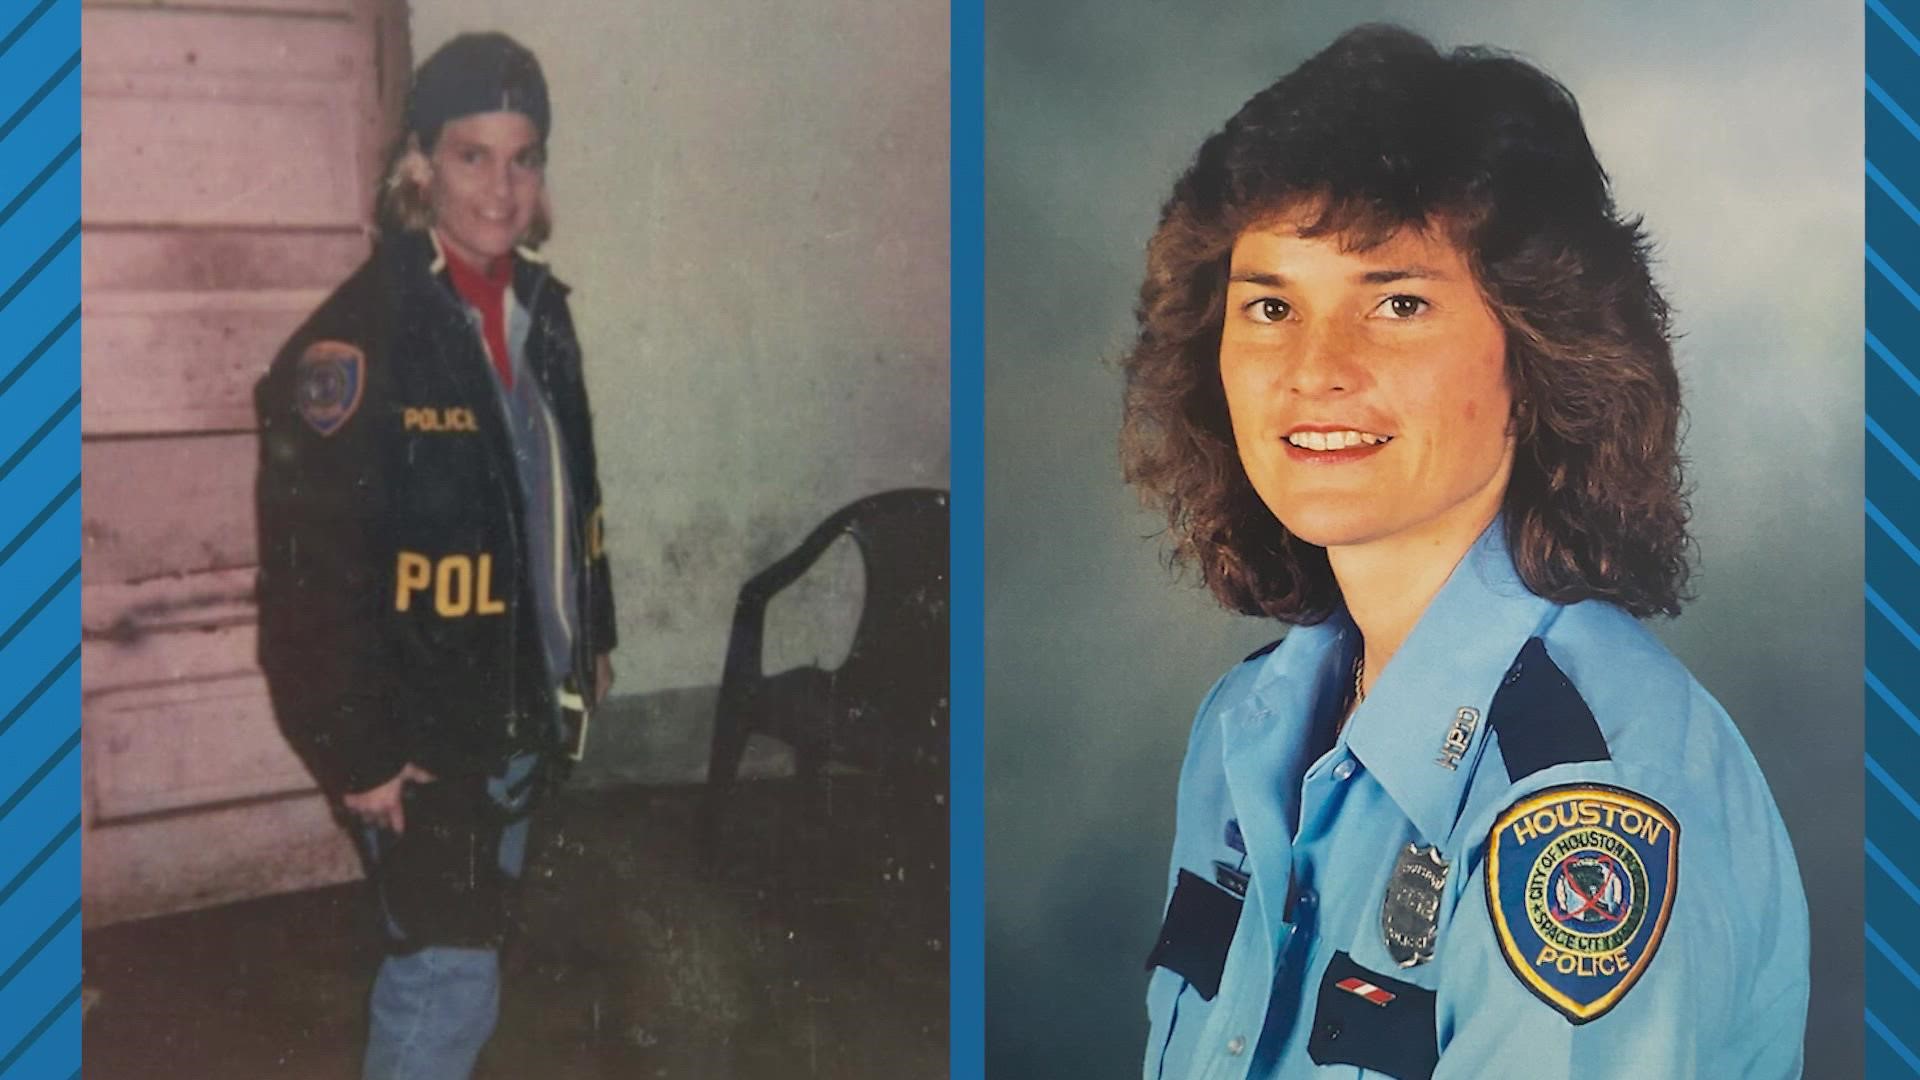 Commander Tinsley Guinn-Shaver's career of more than 4 decades includes near-death experiences, major hurricanes and becoming "Mama Bear" to fellow officers.